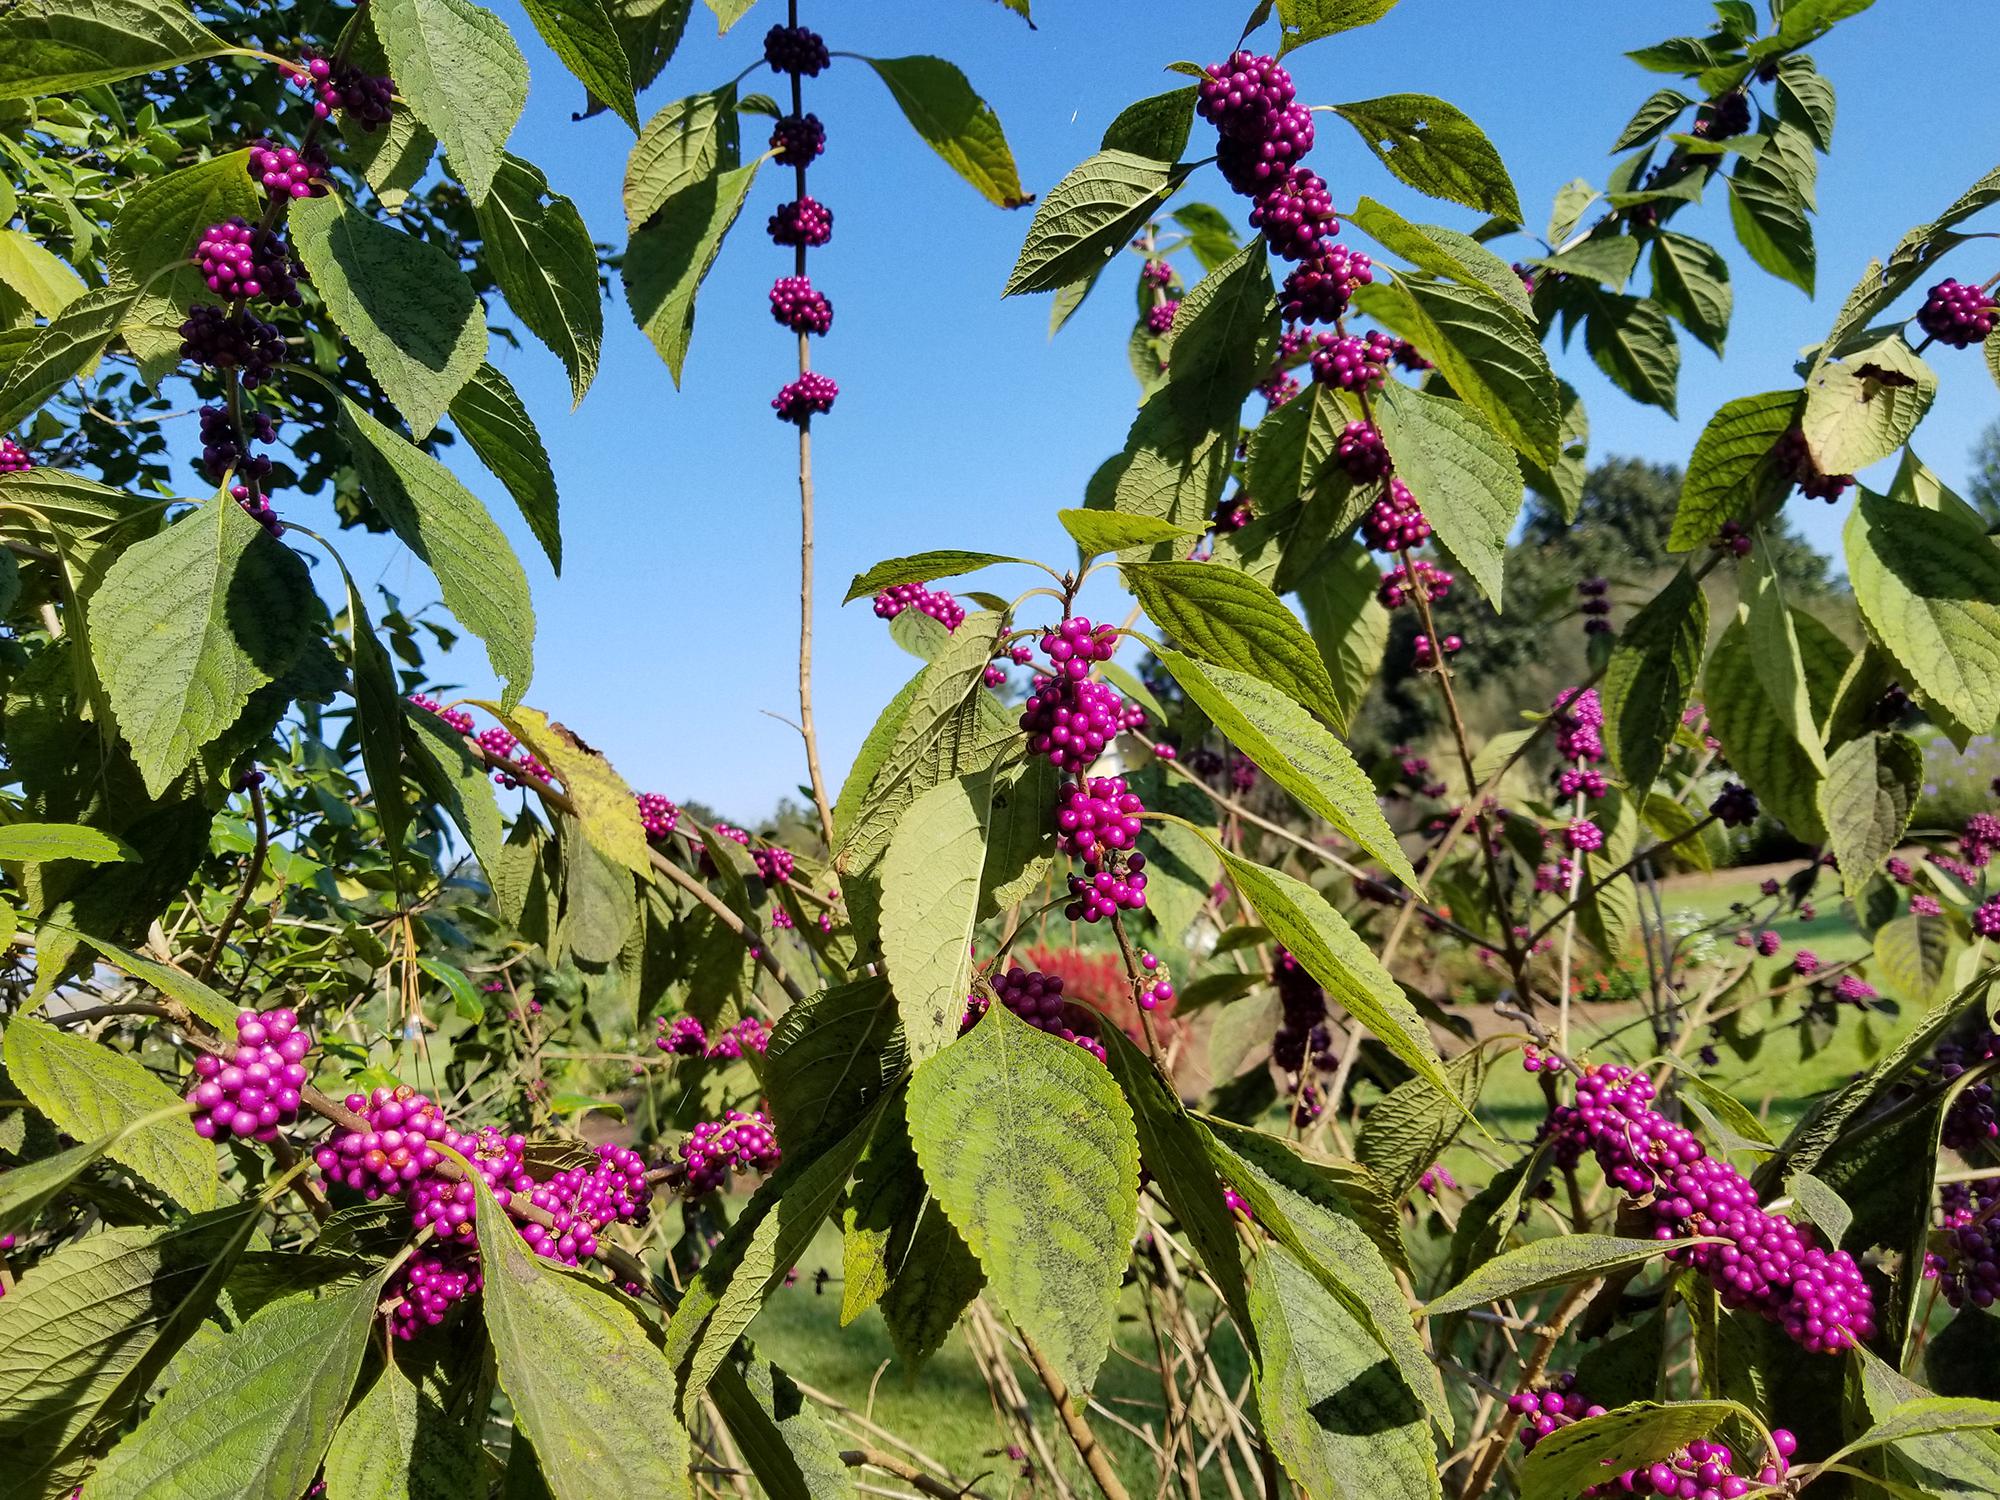 American beautyberry, a native shrub with tiny flowers and prolific berries, is excellent in home landscapes.